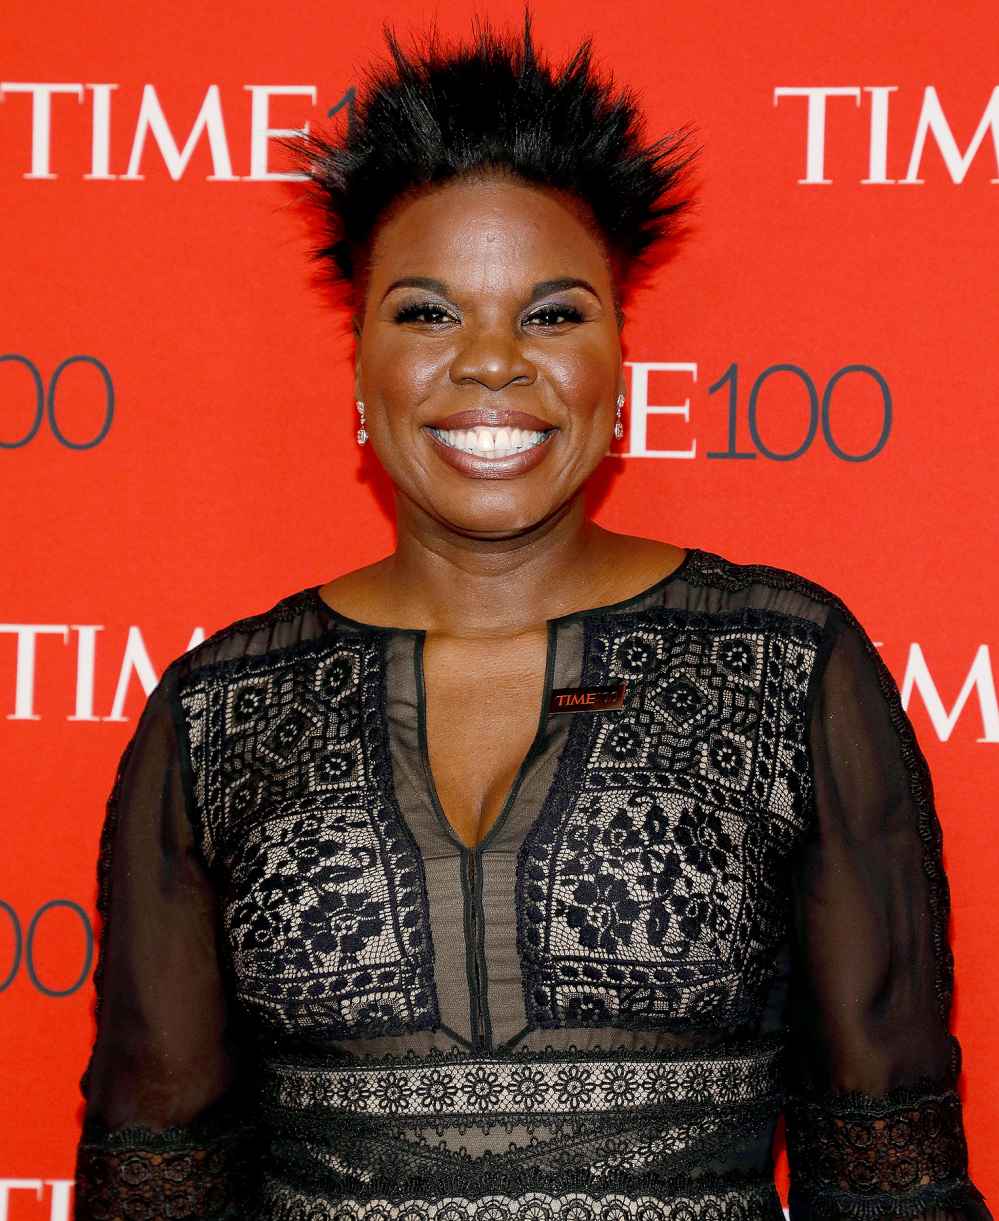 Leslie Jones attends the 2017 Time 100 Gala at Jazz at Lincoln Center on April 25, 2017 in New York City.